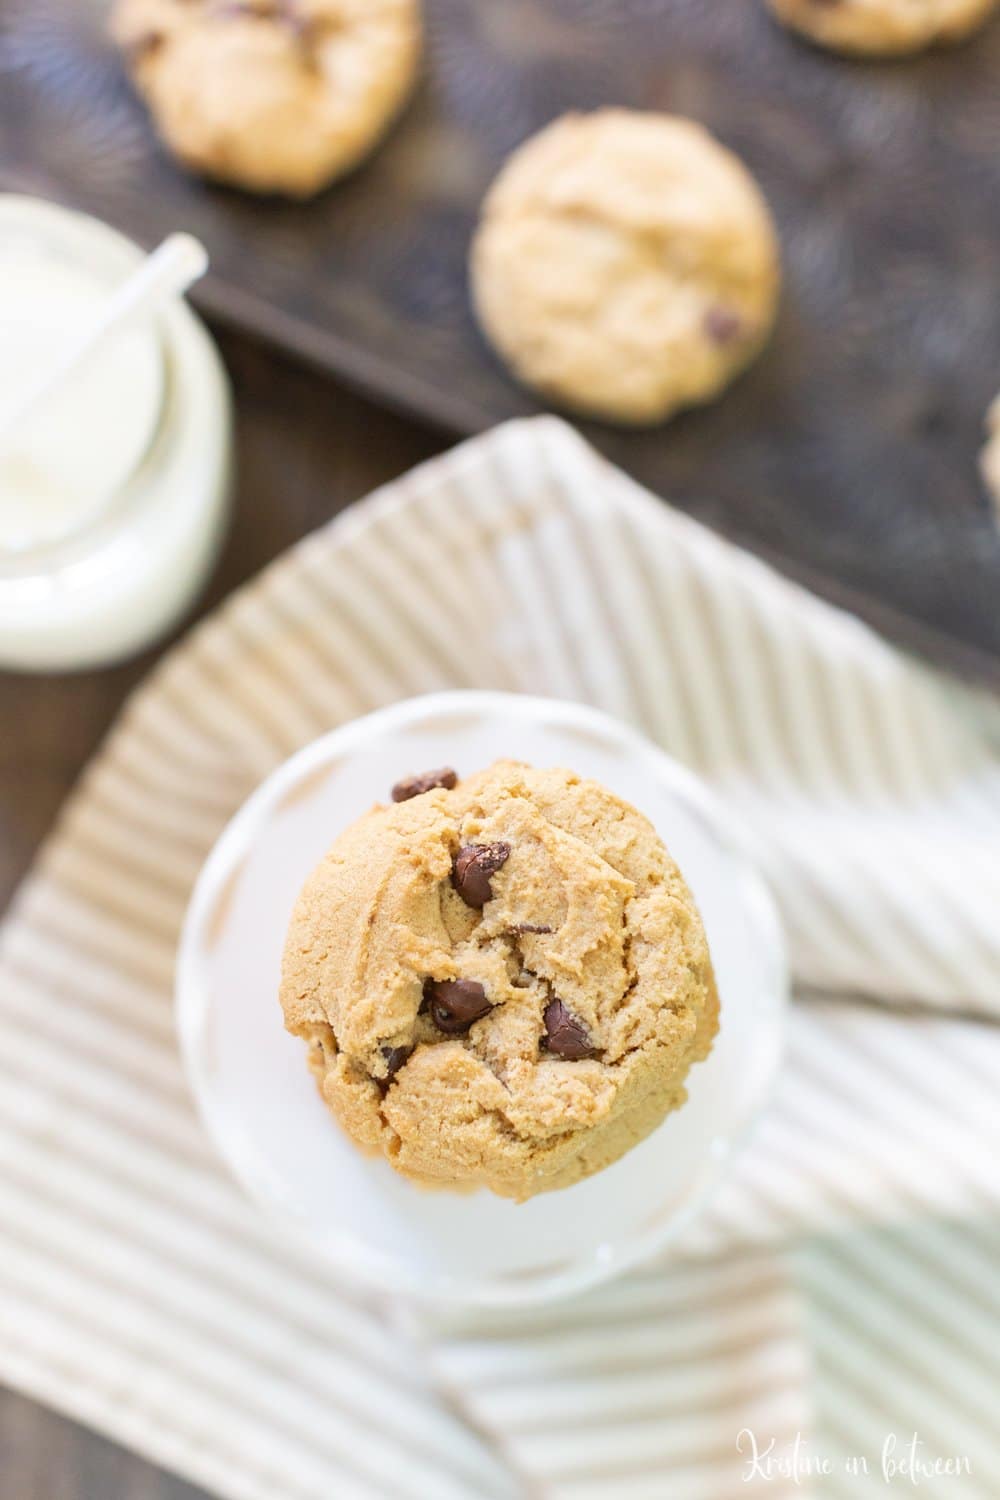 These peanut butter chocolate chip cookies are quick and easy, making them perfect for any day!